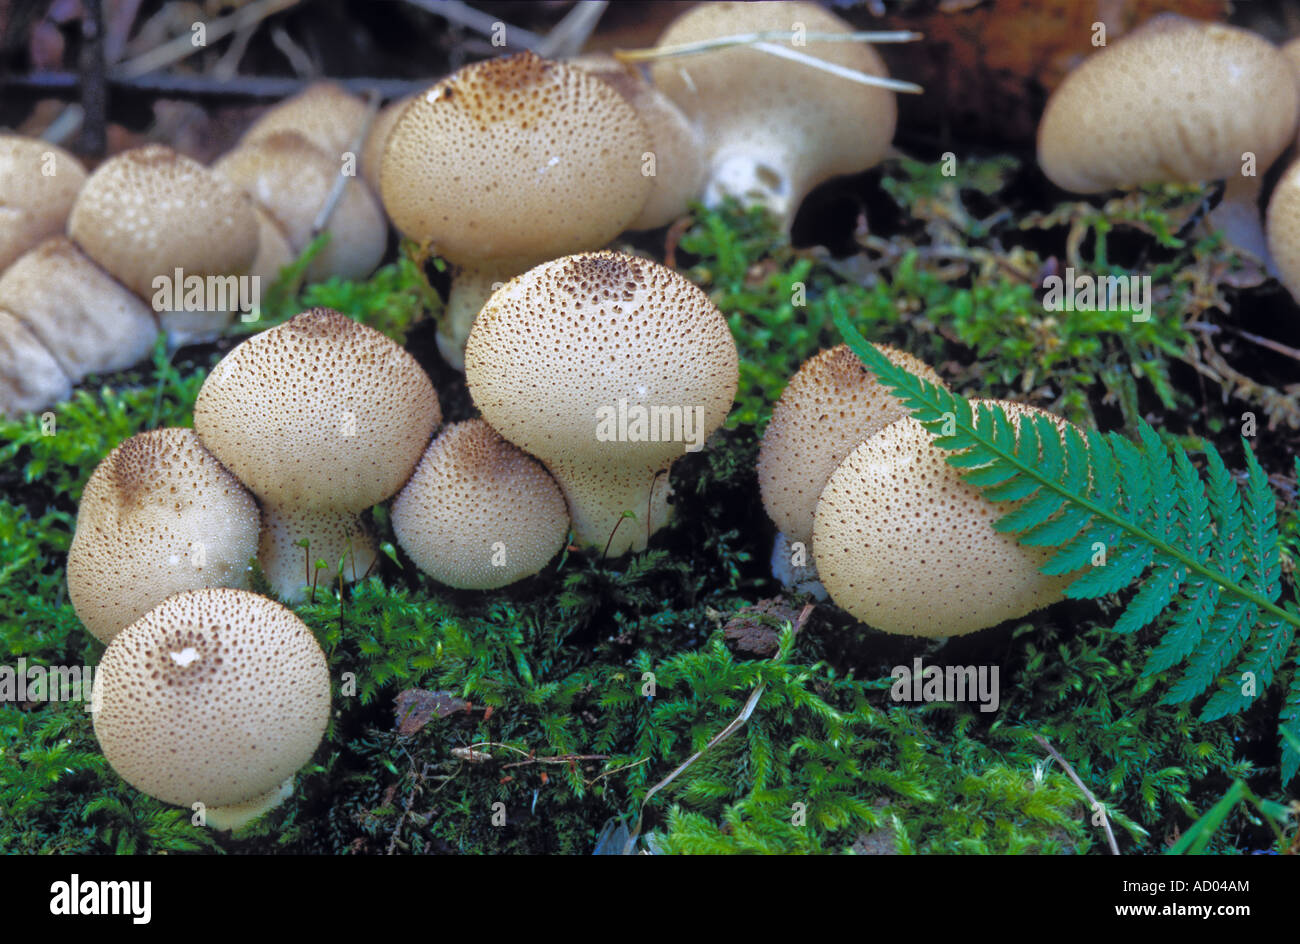 Group of mushrooms Lycoperdon perlatum Common or Gemmed Puffball growing on ground very common everywhere edible Stock Photo